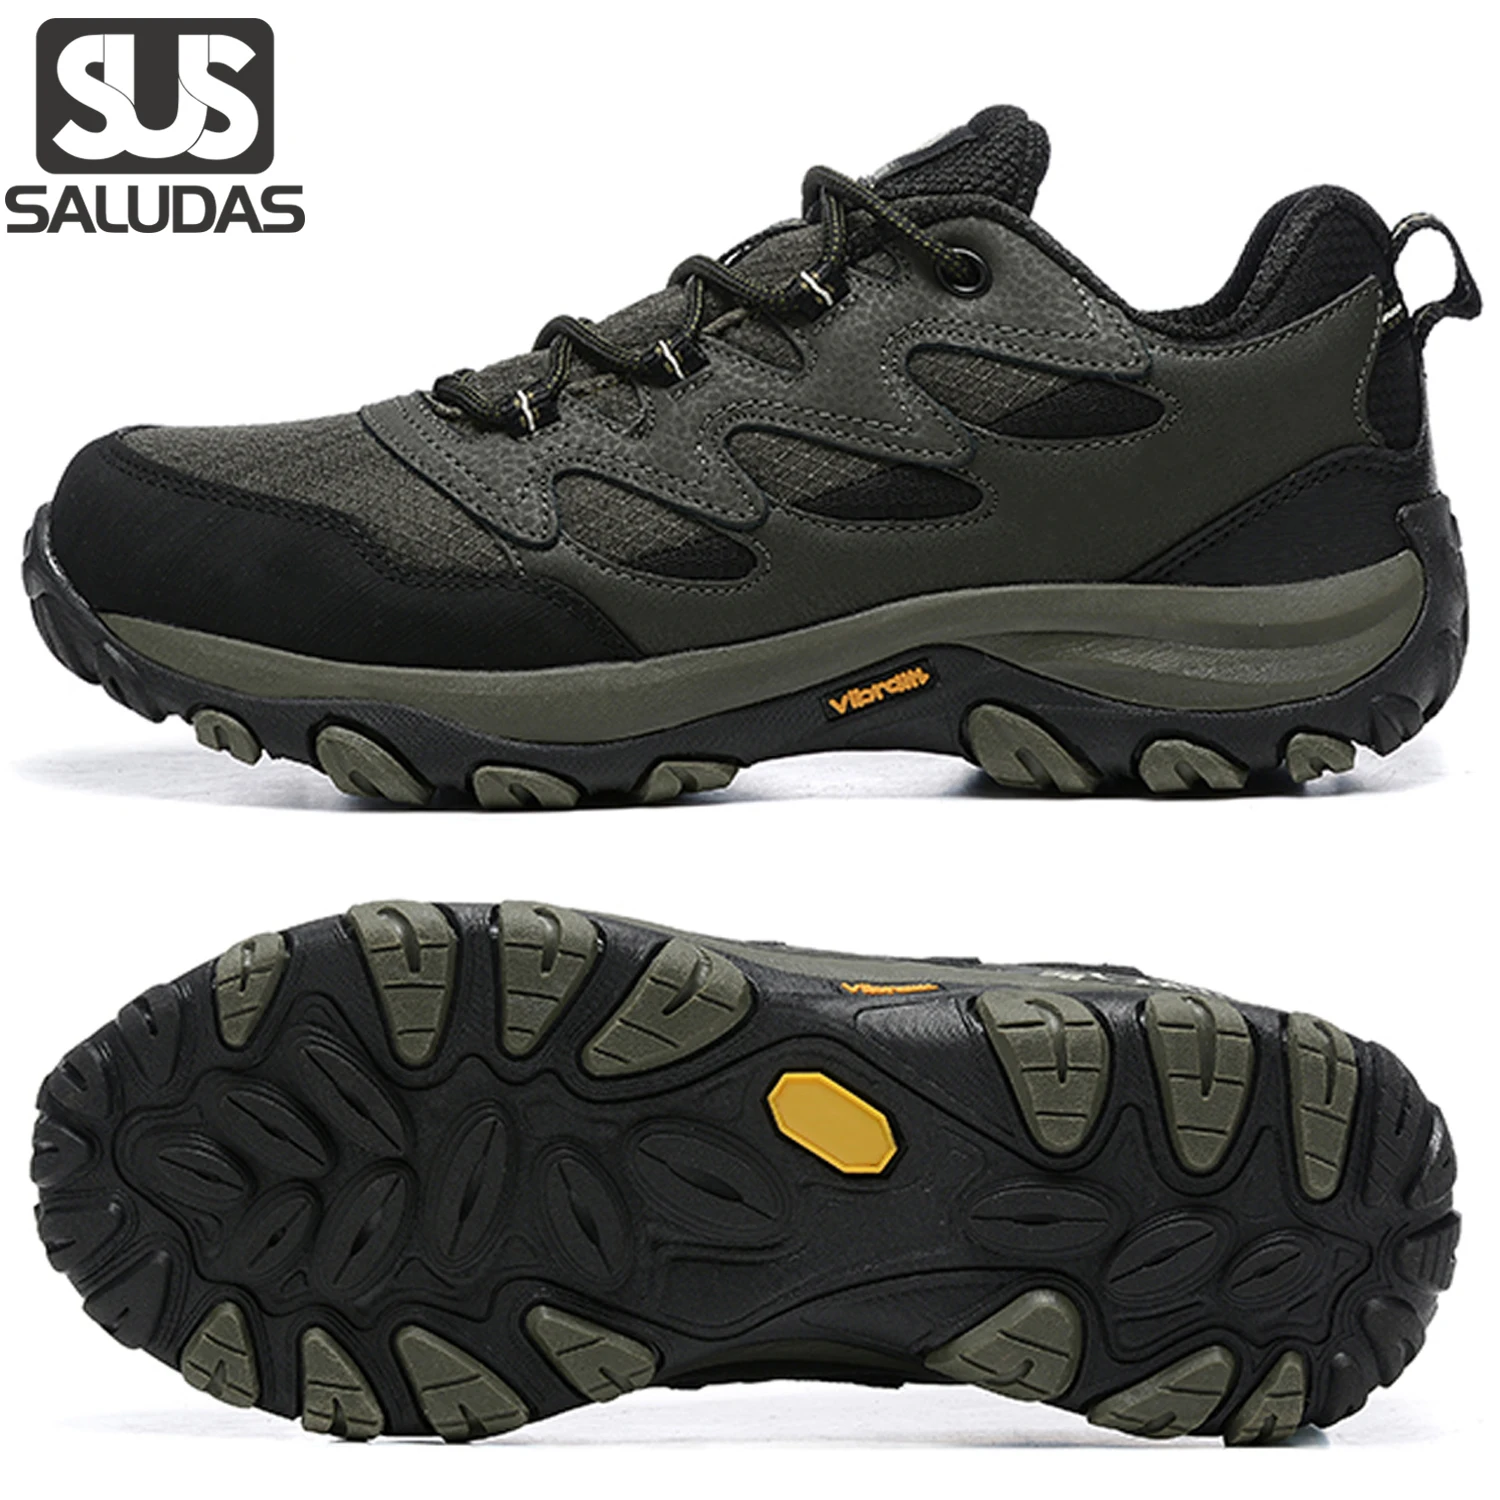 

SALUDAS Men Shoes Outdoor Hiking Shoes Breathable Mountain Climbing Shoe Hunting Trekking Sneakers For Men Trail Running Shoes